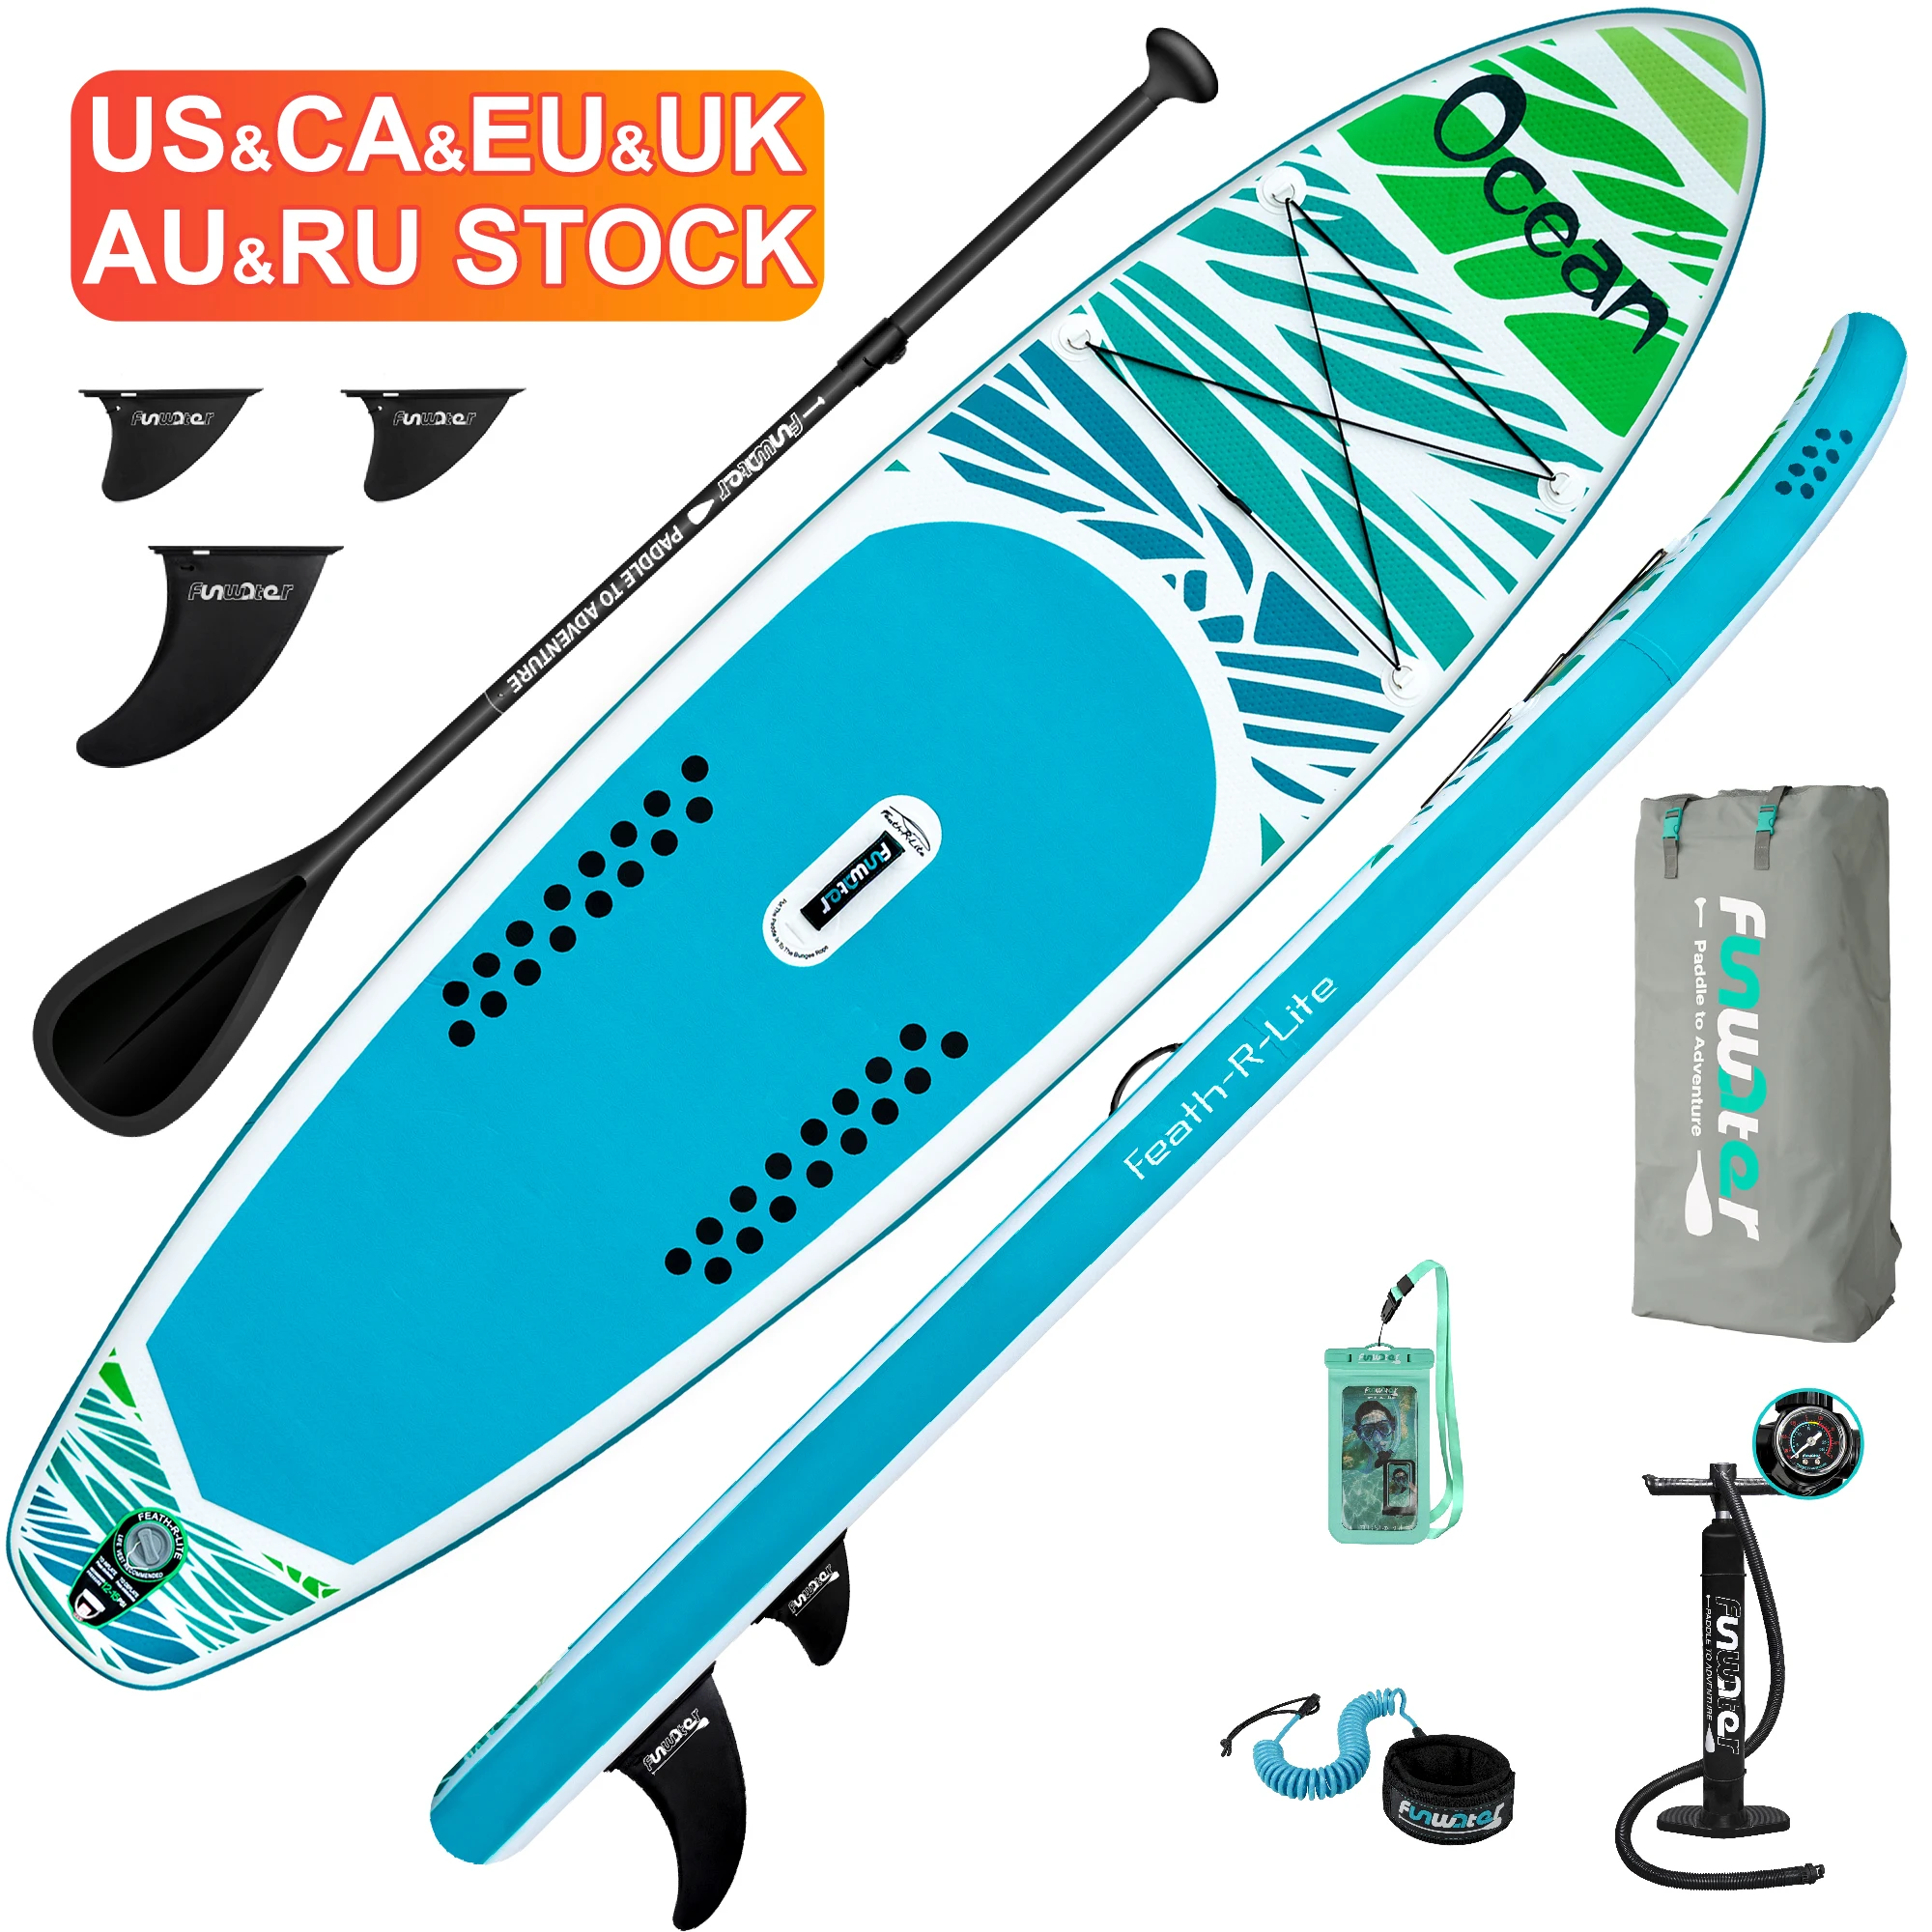 

FUNWATER Dropshipping OEM 10'6" blue sup paddle board surf board stand up inflatable yoga surfboard isup surfboard